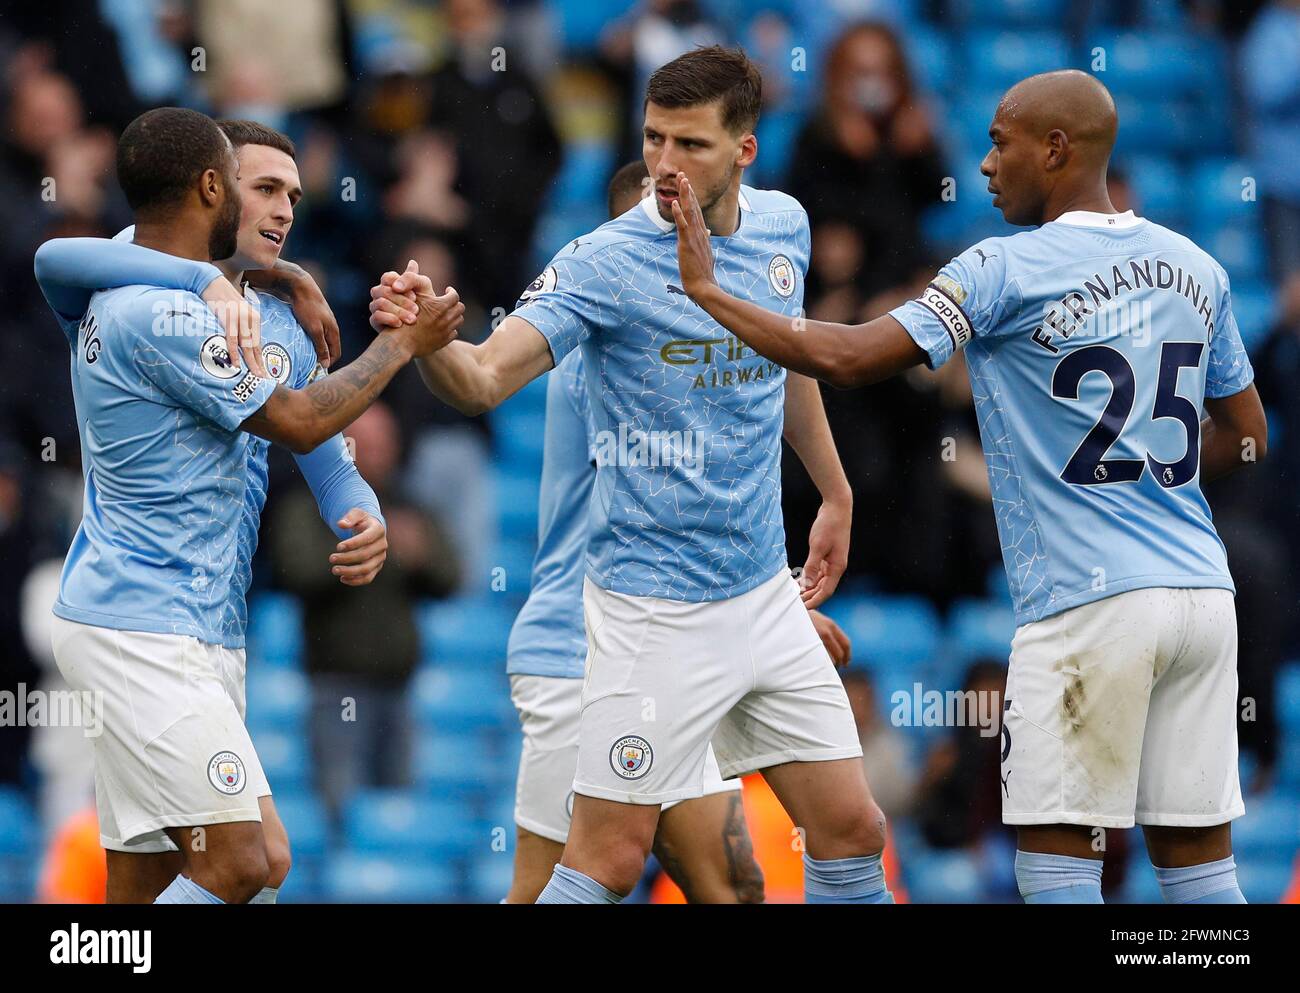 Manchester, England, 23rd May 2021. Phil Foden of Manchester City celebrates his goal during the Premier League match at the Etihad Stadium, Manchester. Picture credit should read: Darren Staples / Sportimage Credit: Sportimage/Alamy Live News Stock Photo